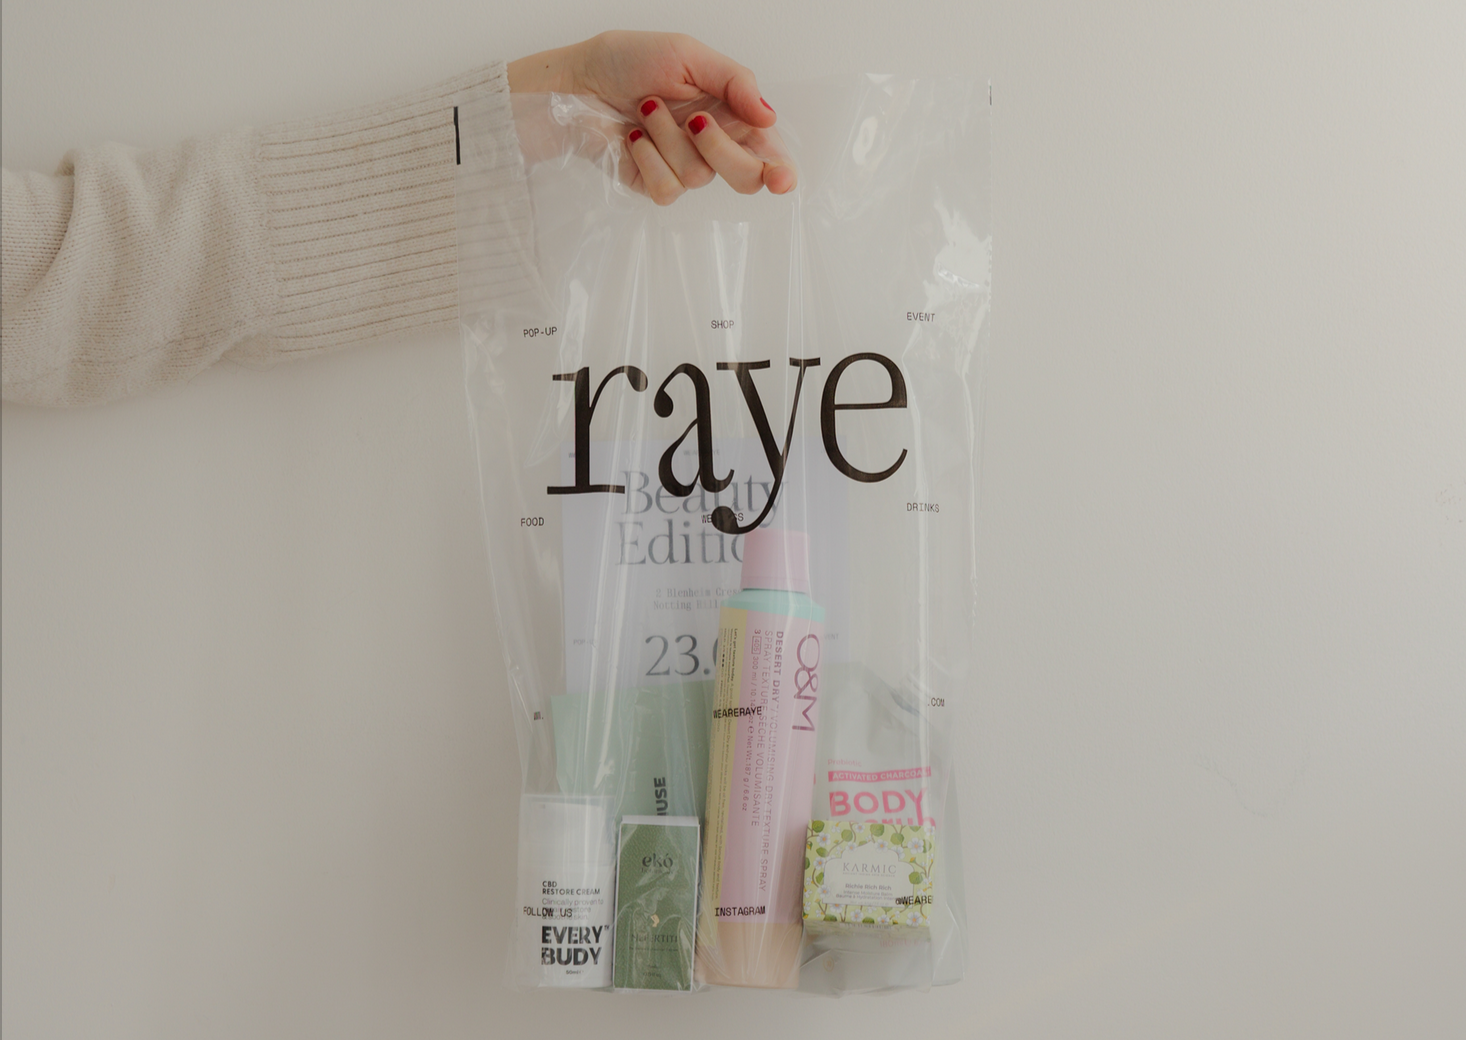 Our Amazing Time RAYE's Beauty Edition Pop-Up